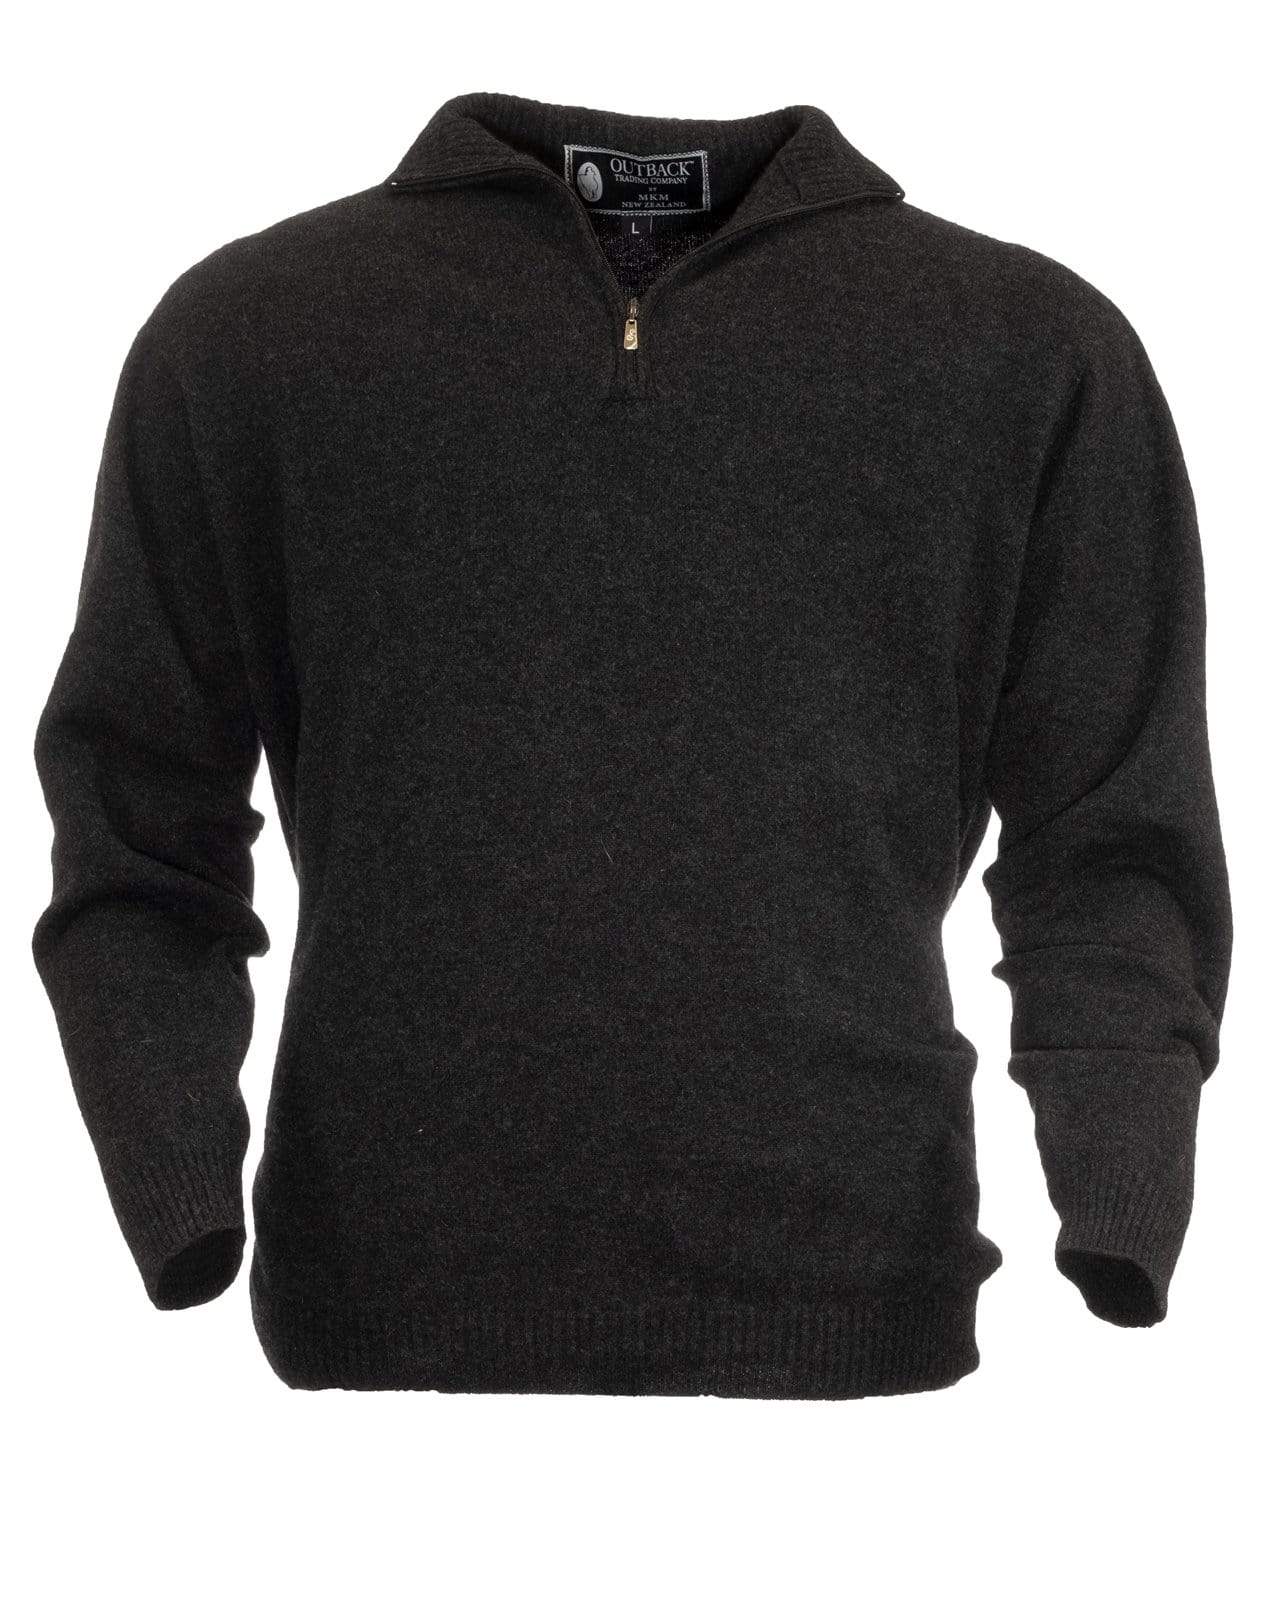 Outback Trading Company Men’s Palmerston Merino Sweater Charcoal / S 6537-CHR-SM 789043391046 Shirts & Tops